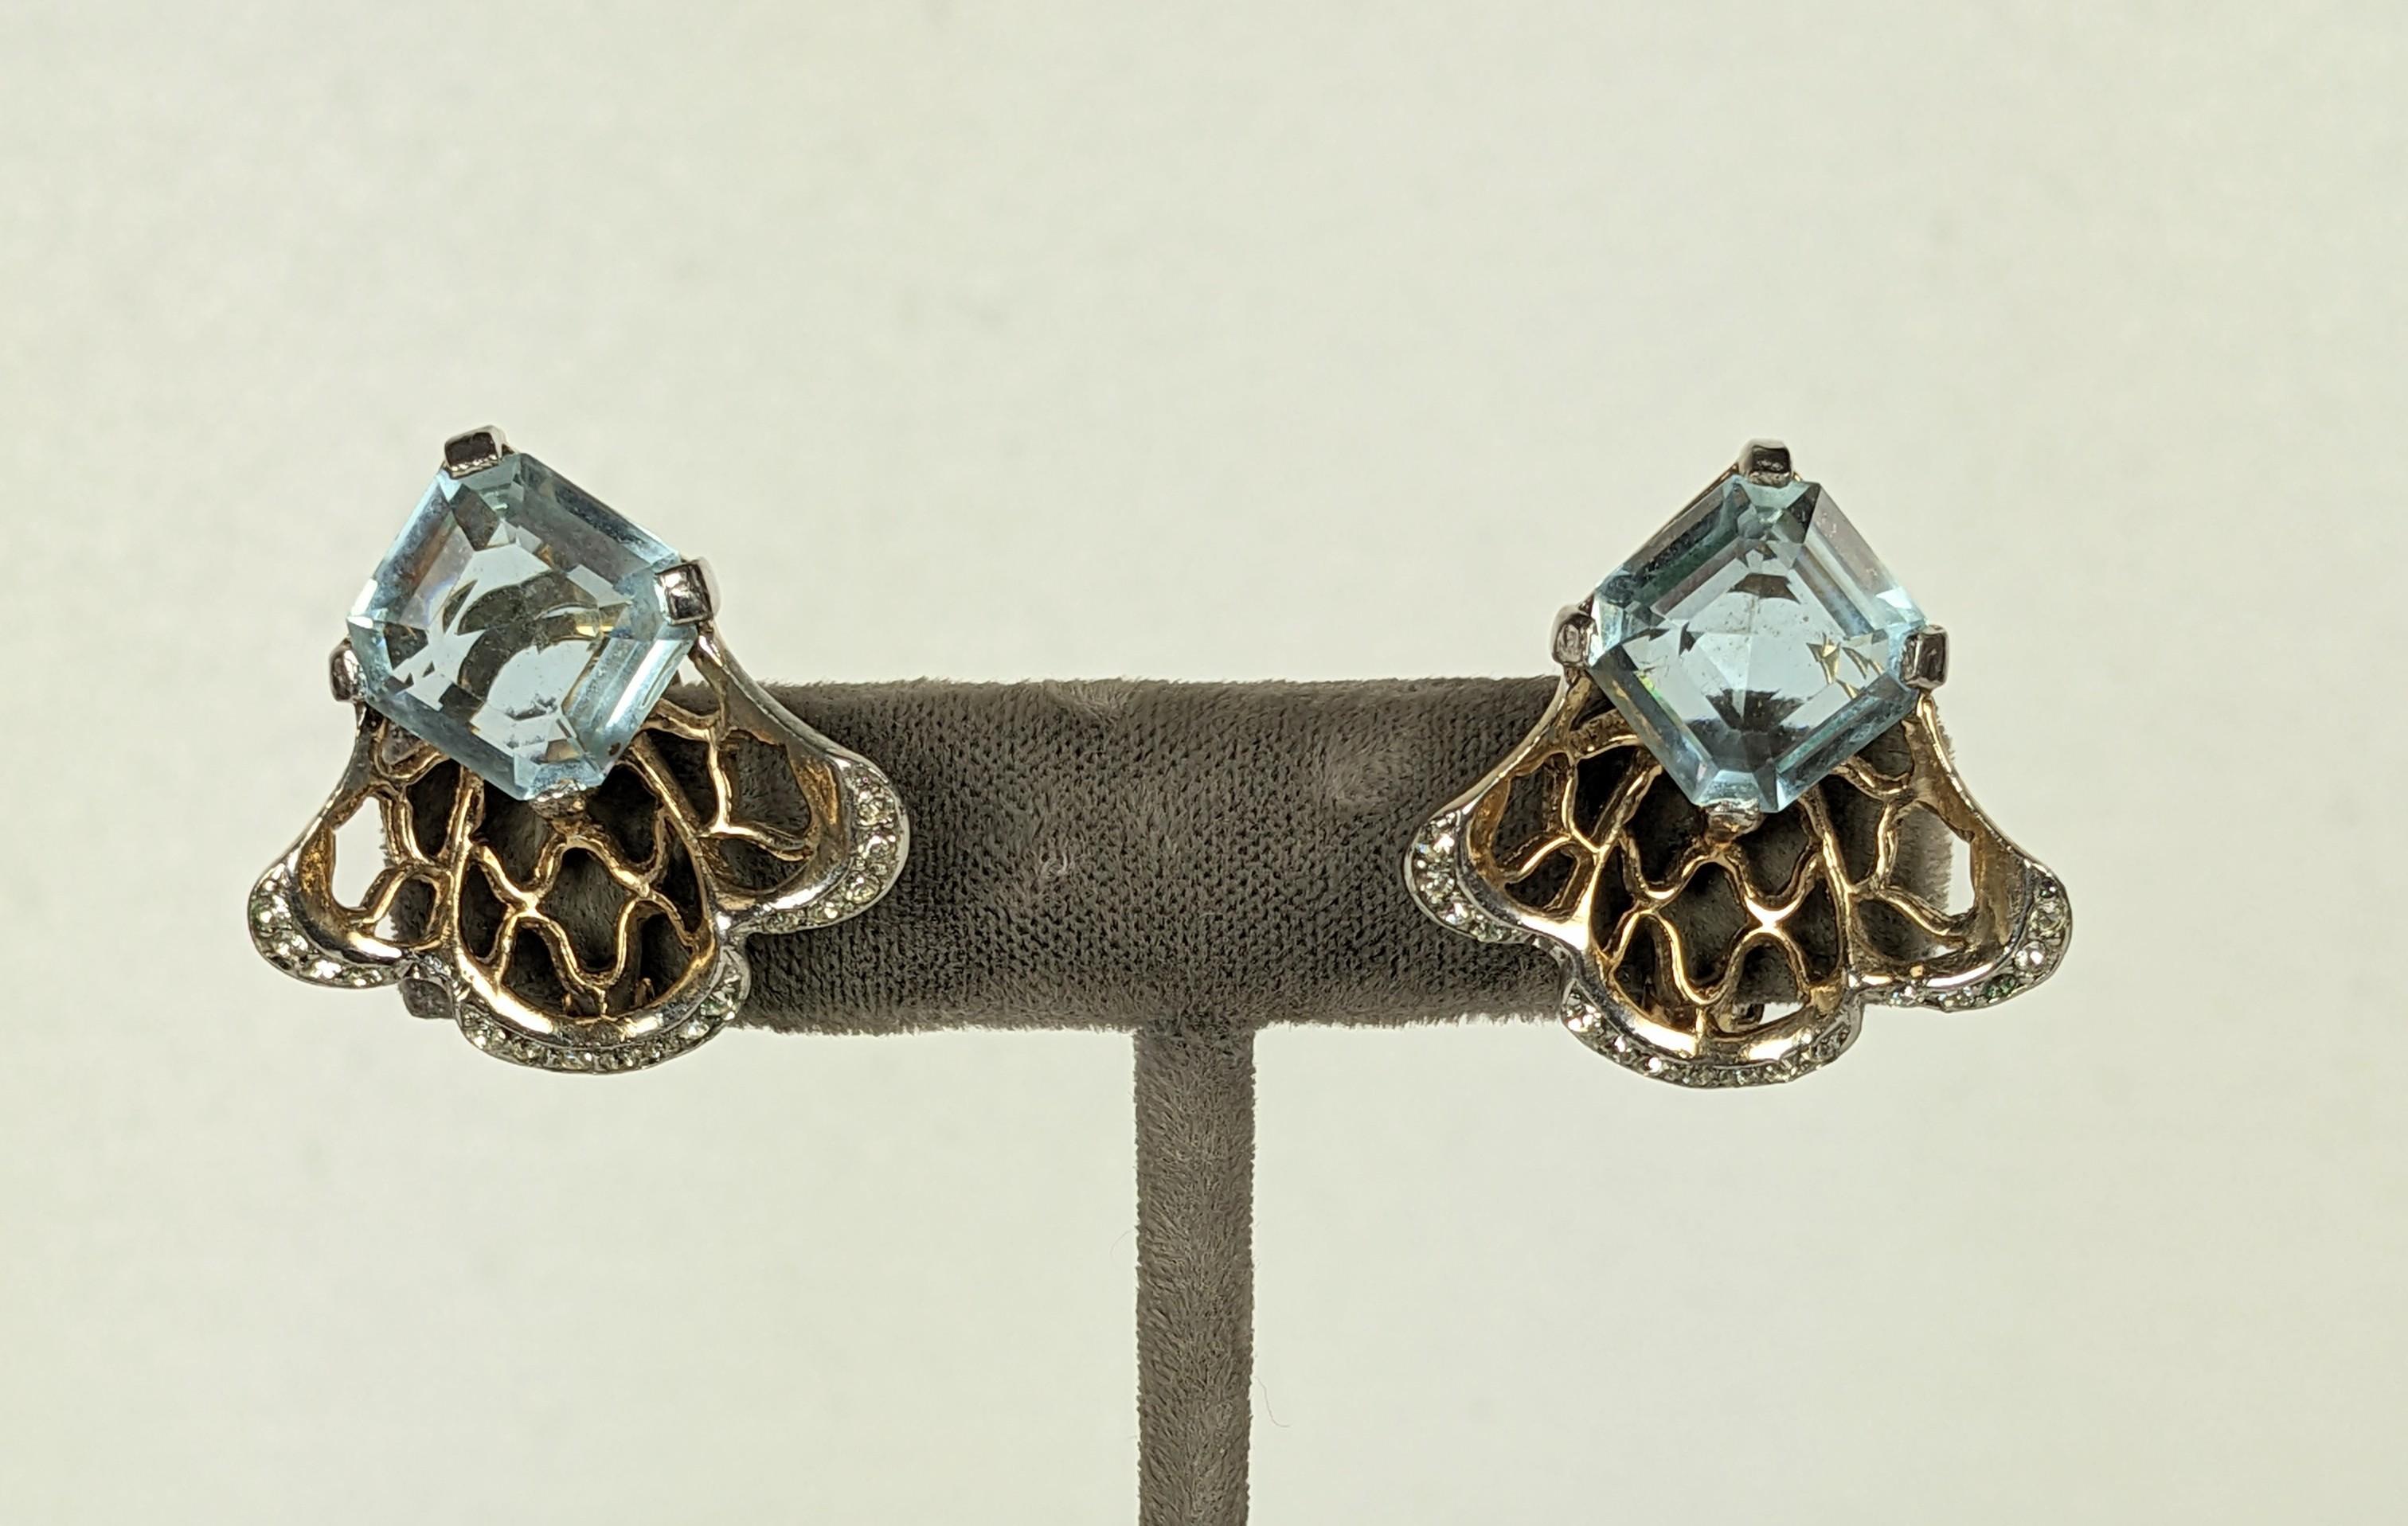 Reja retro earclips of a focal faux pale blue amythest , with crystal baguette accents and crystal rhinestone pave. Set into a Retro inspired fretwork shell of pale pink gold plate over rhodium plate base metal. Good Condition, Clip back fittings.